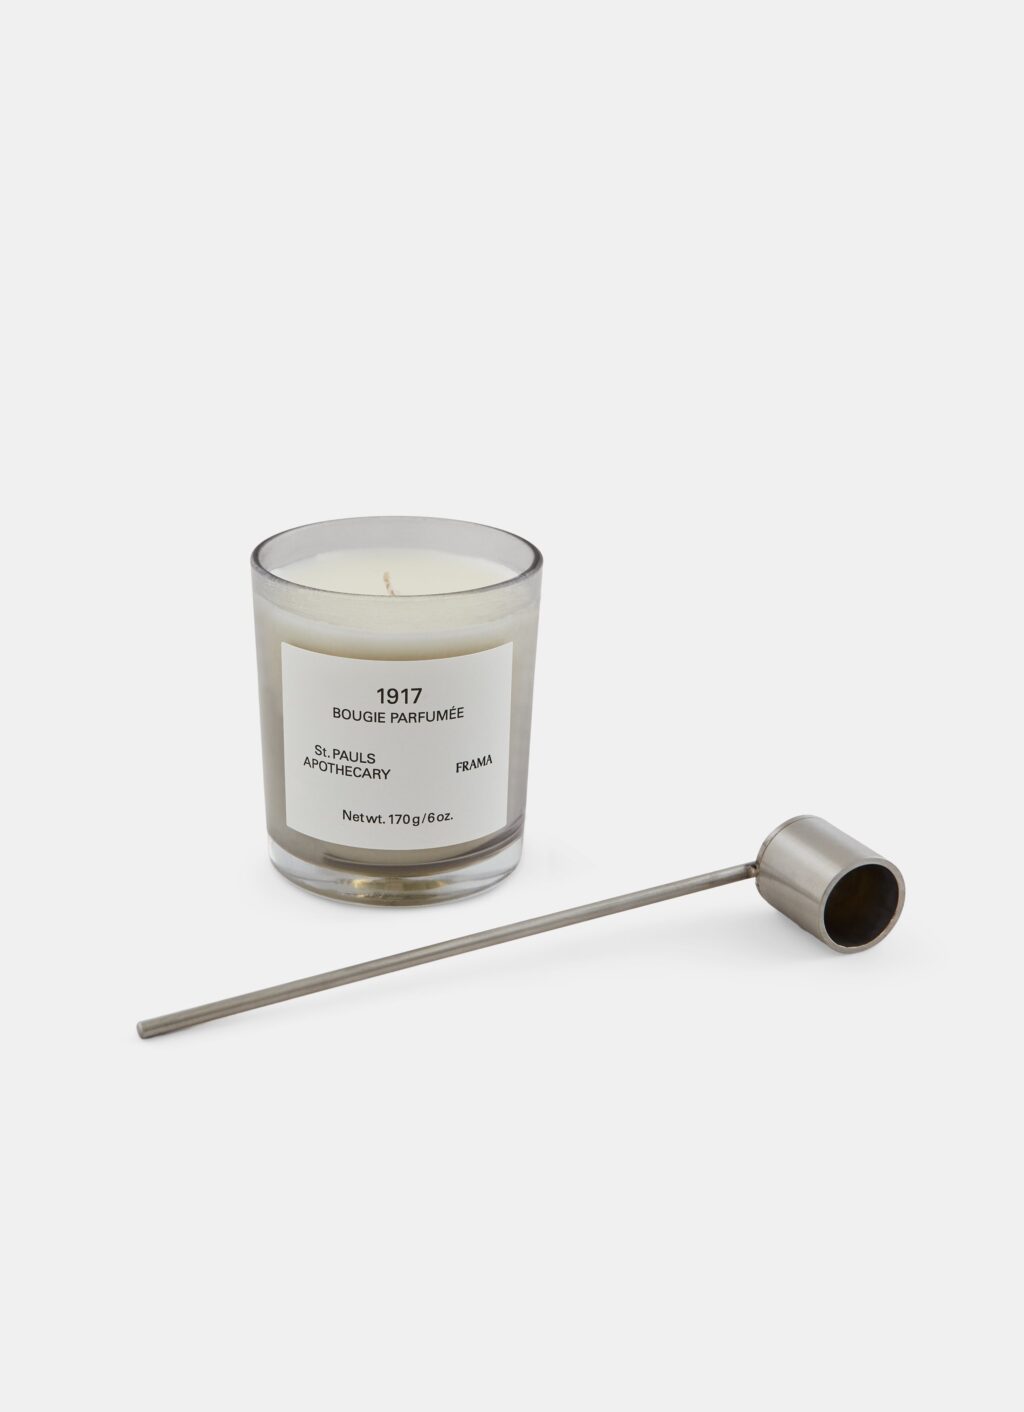 Frama - Scented Candle - 1917 - 170g